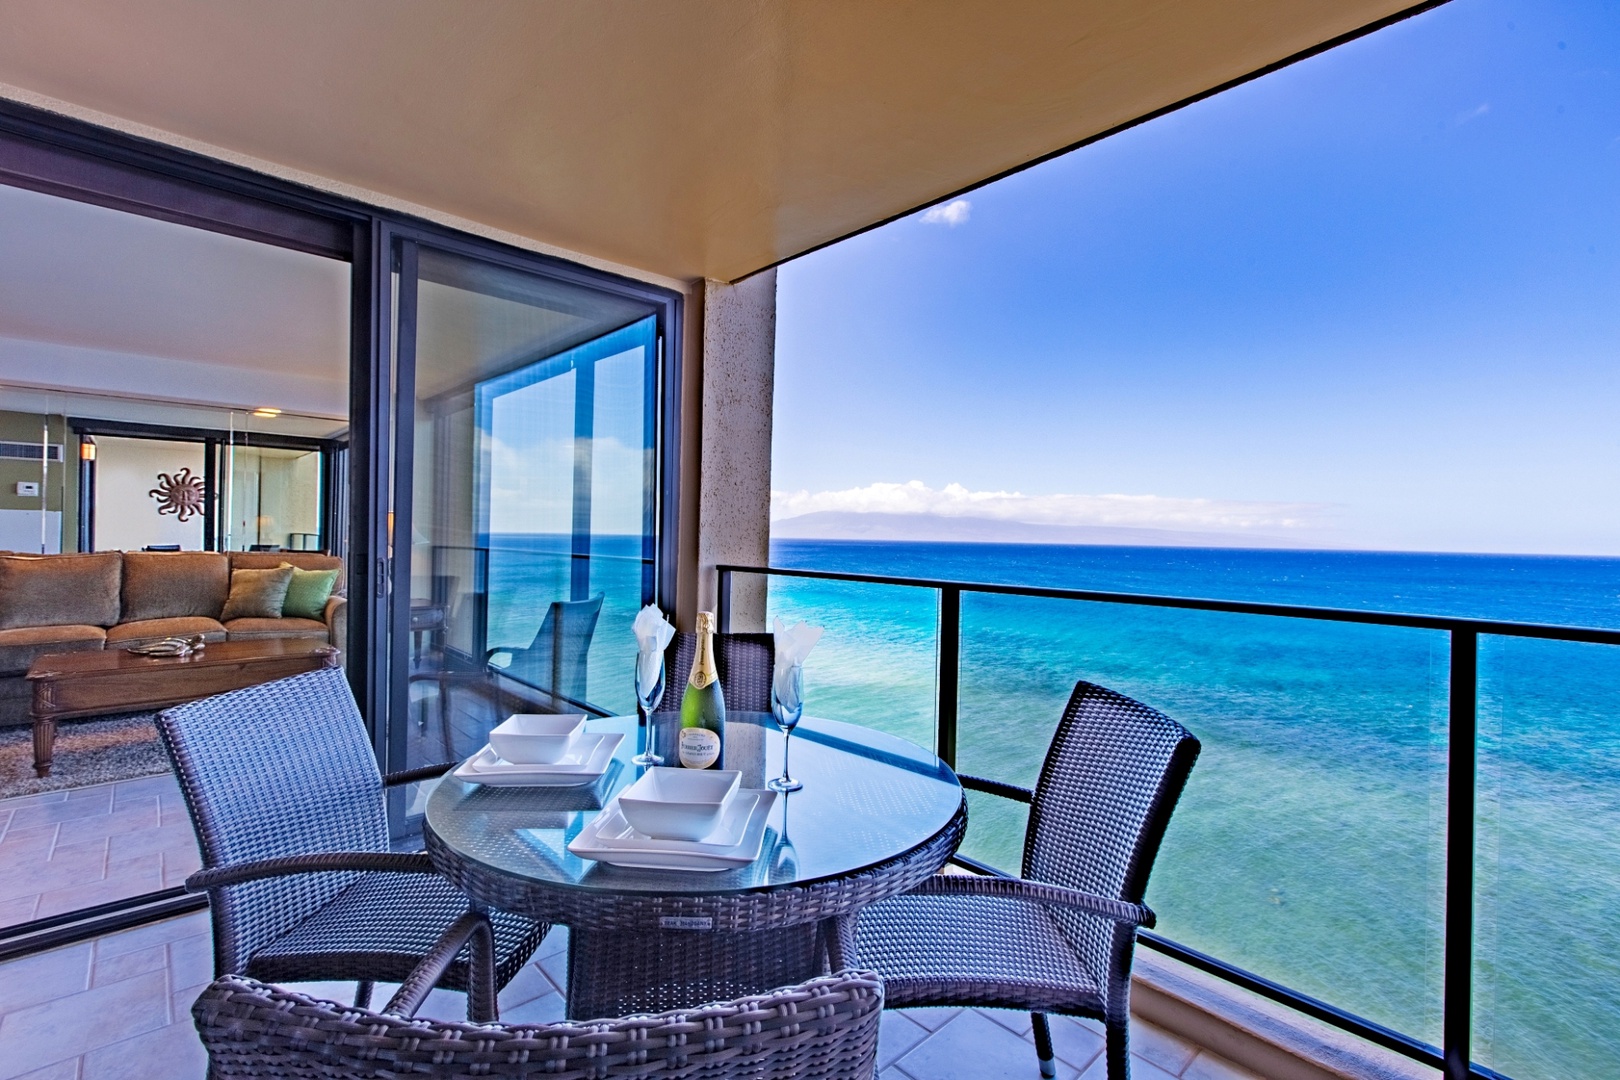 Enjoy the ocean breeze on the lanai that offers a breathtaking ocean view